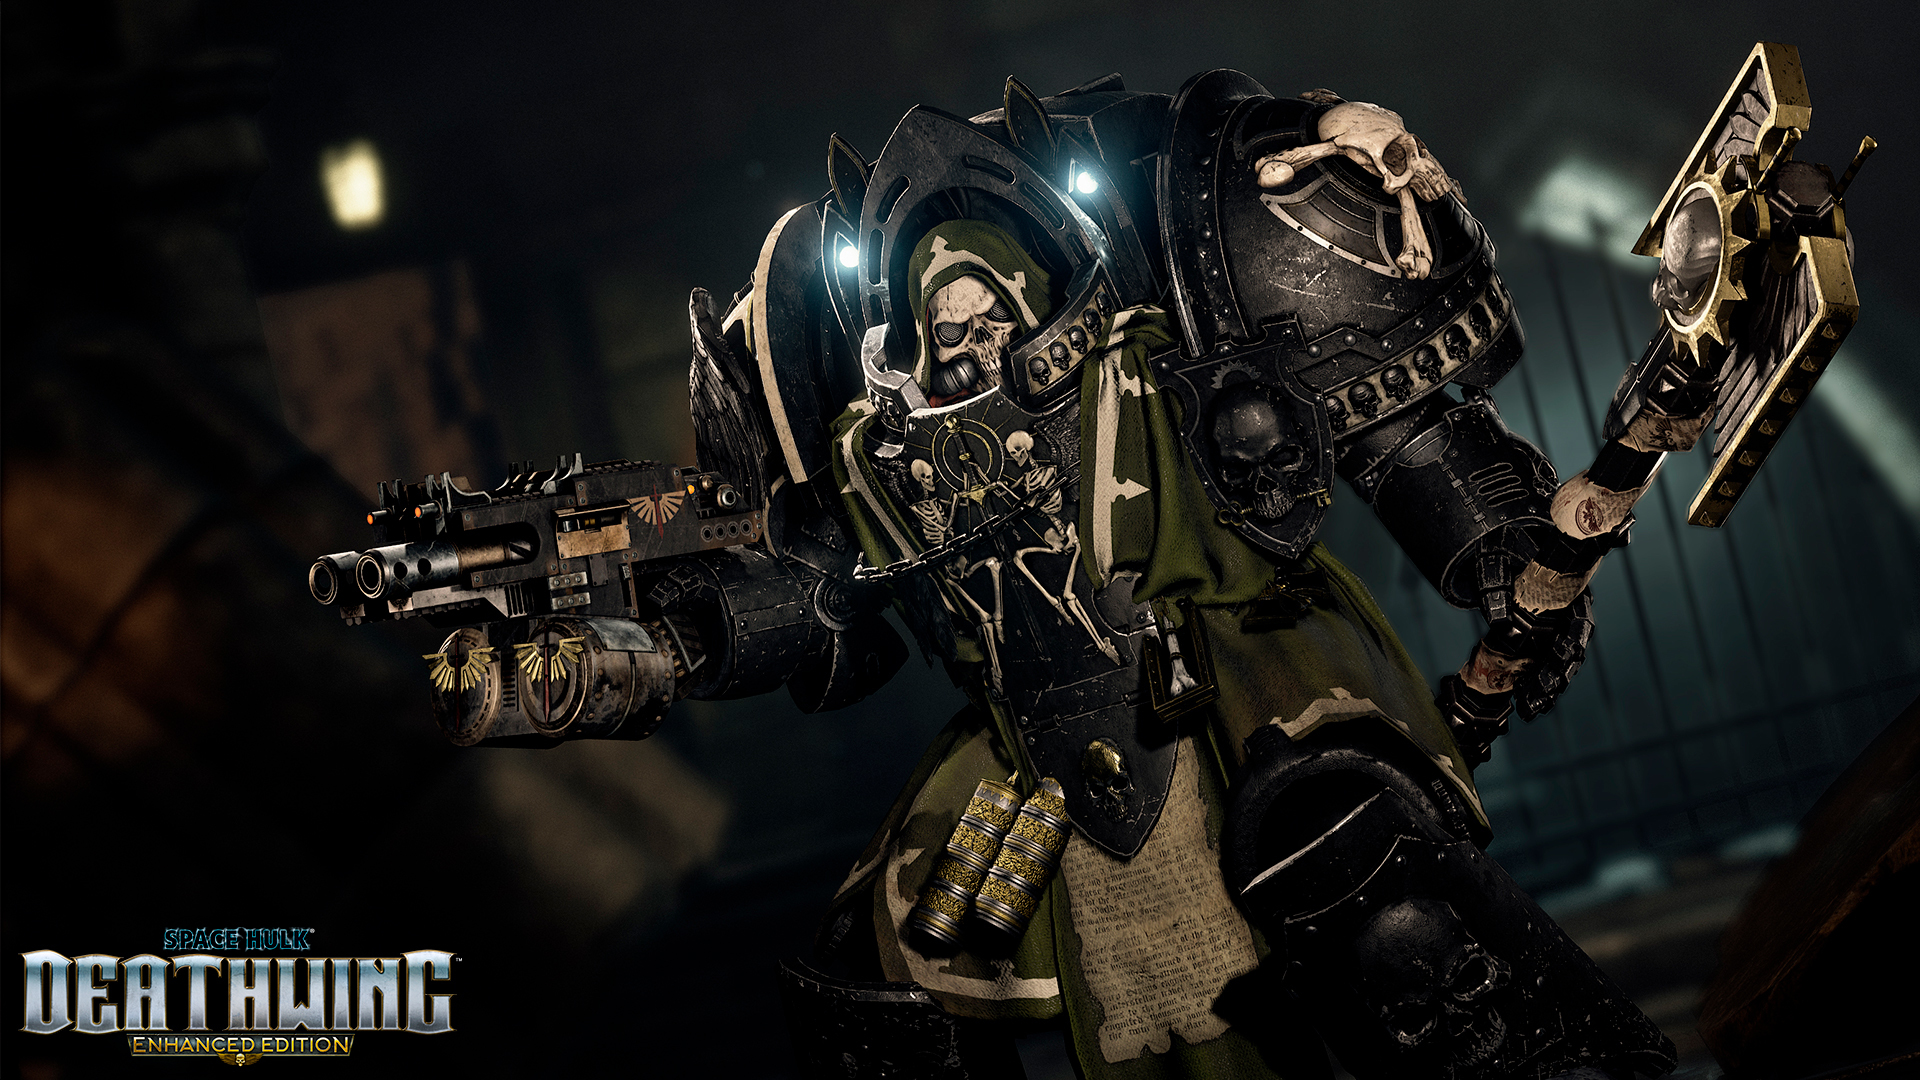 Space Hulk Deathwing A First Glimpse At The Enhanced Edition